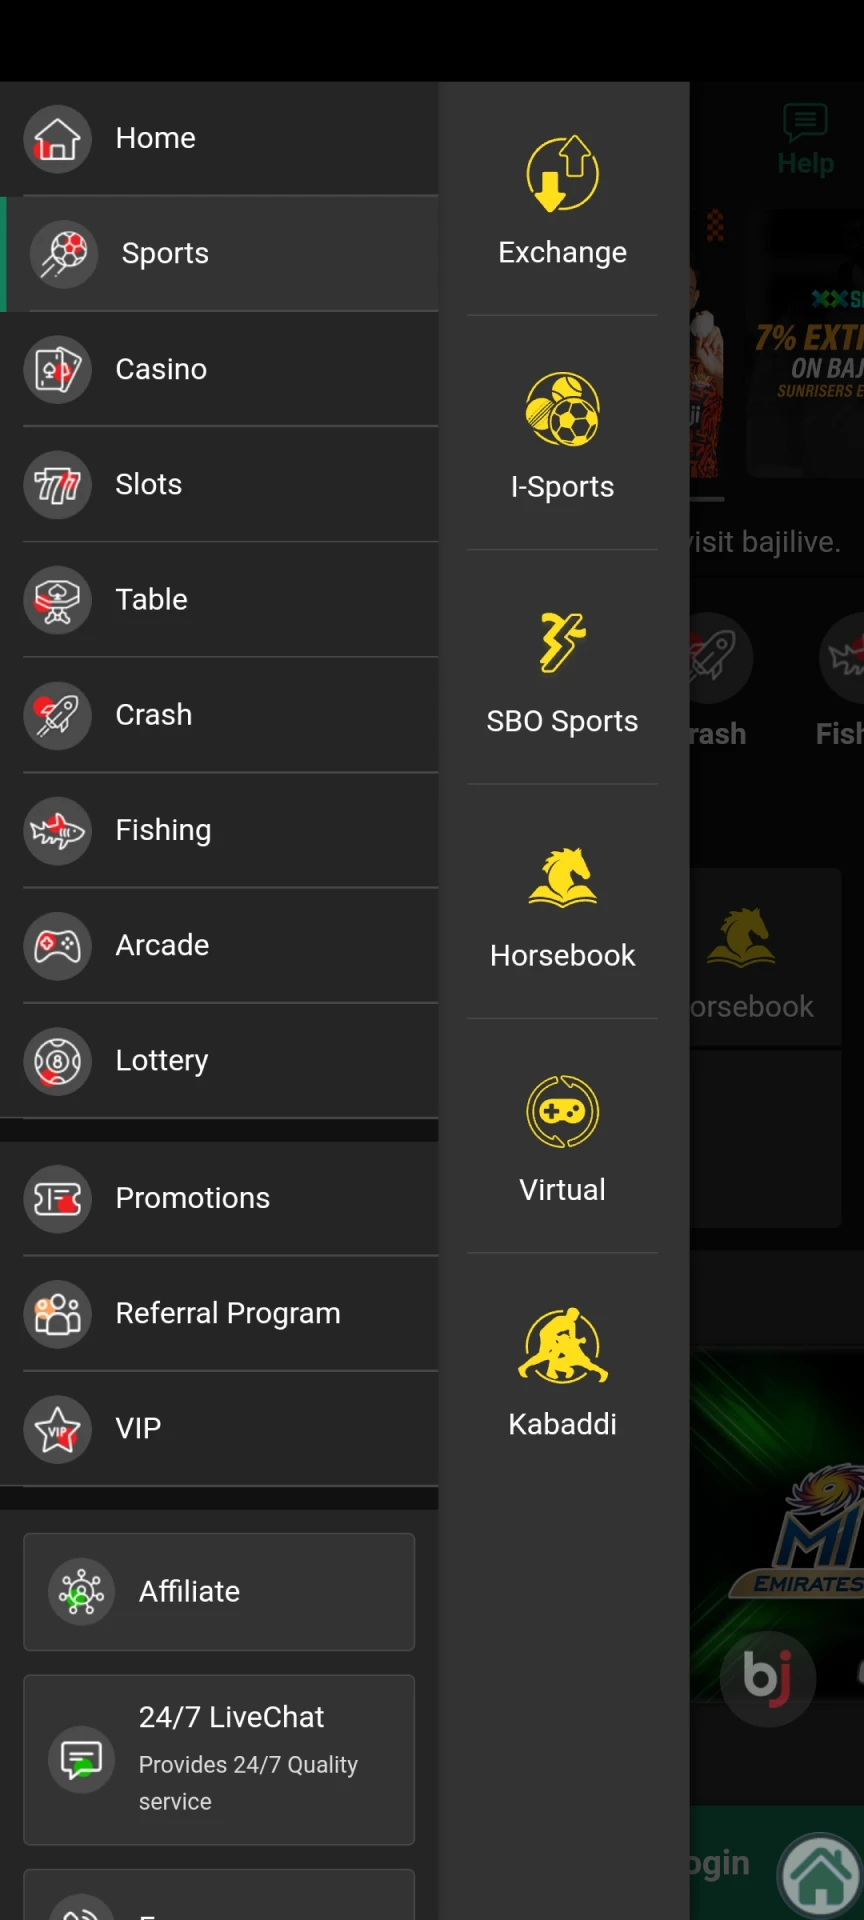 Visit the sports section of the Baji sports app to access all the bookmaker's features.